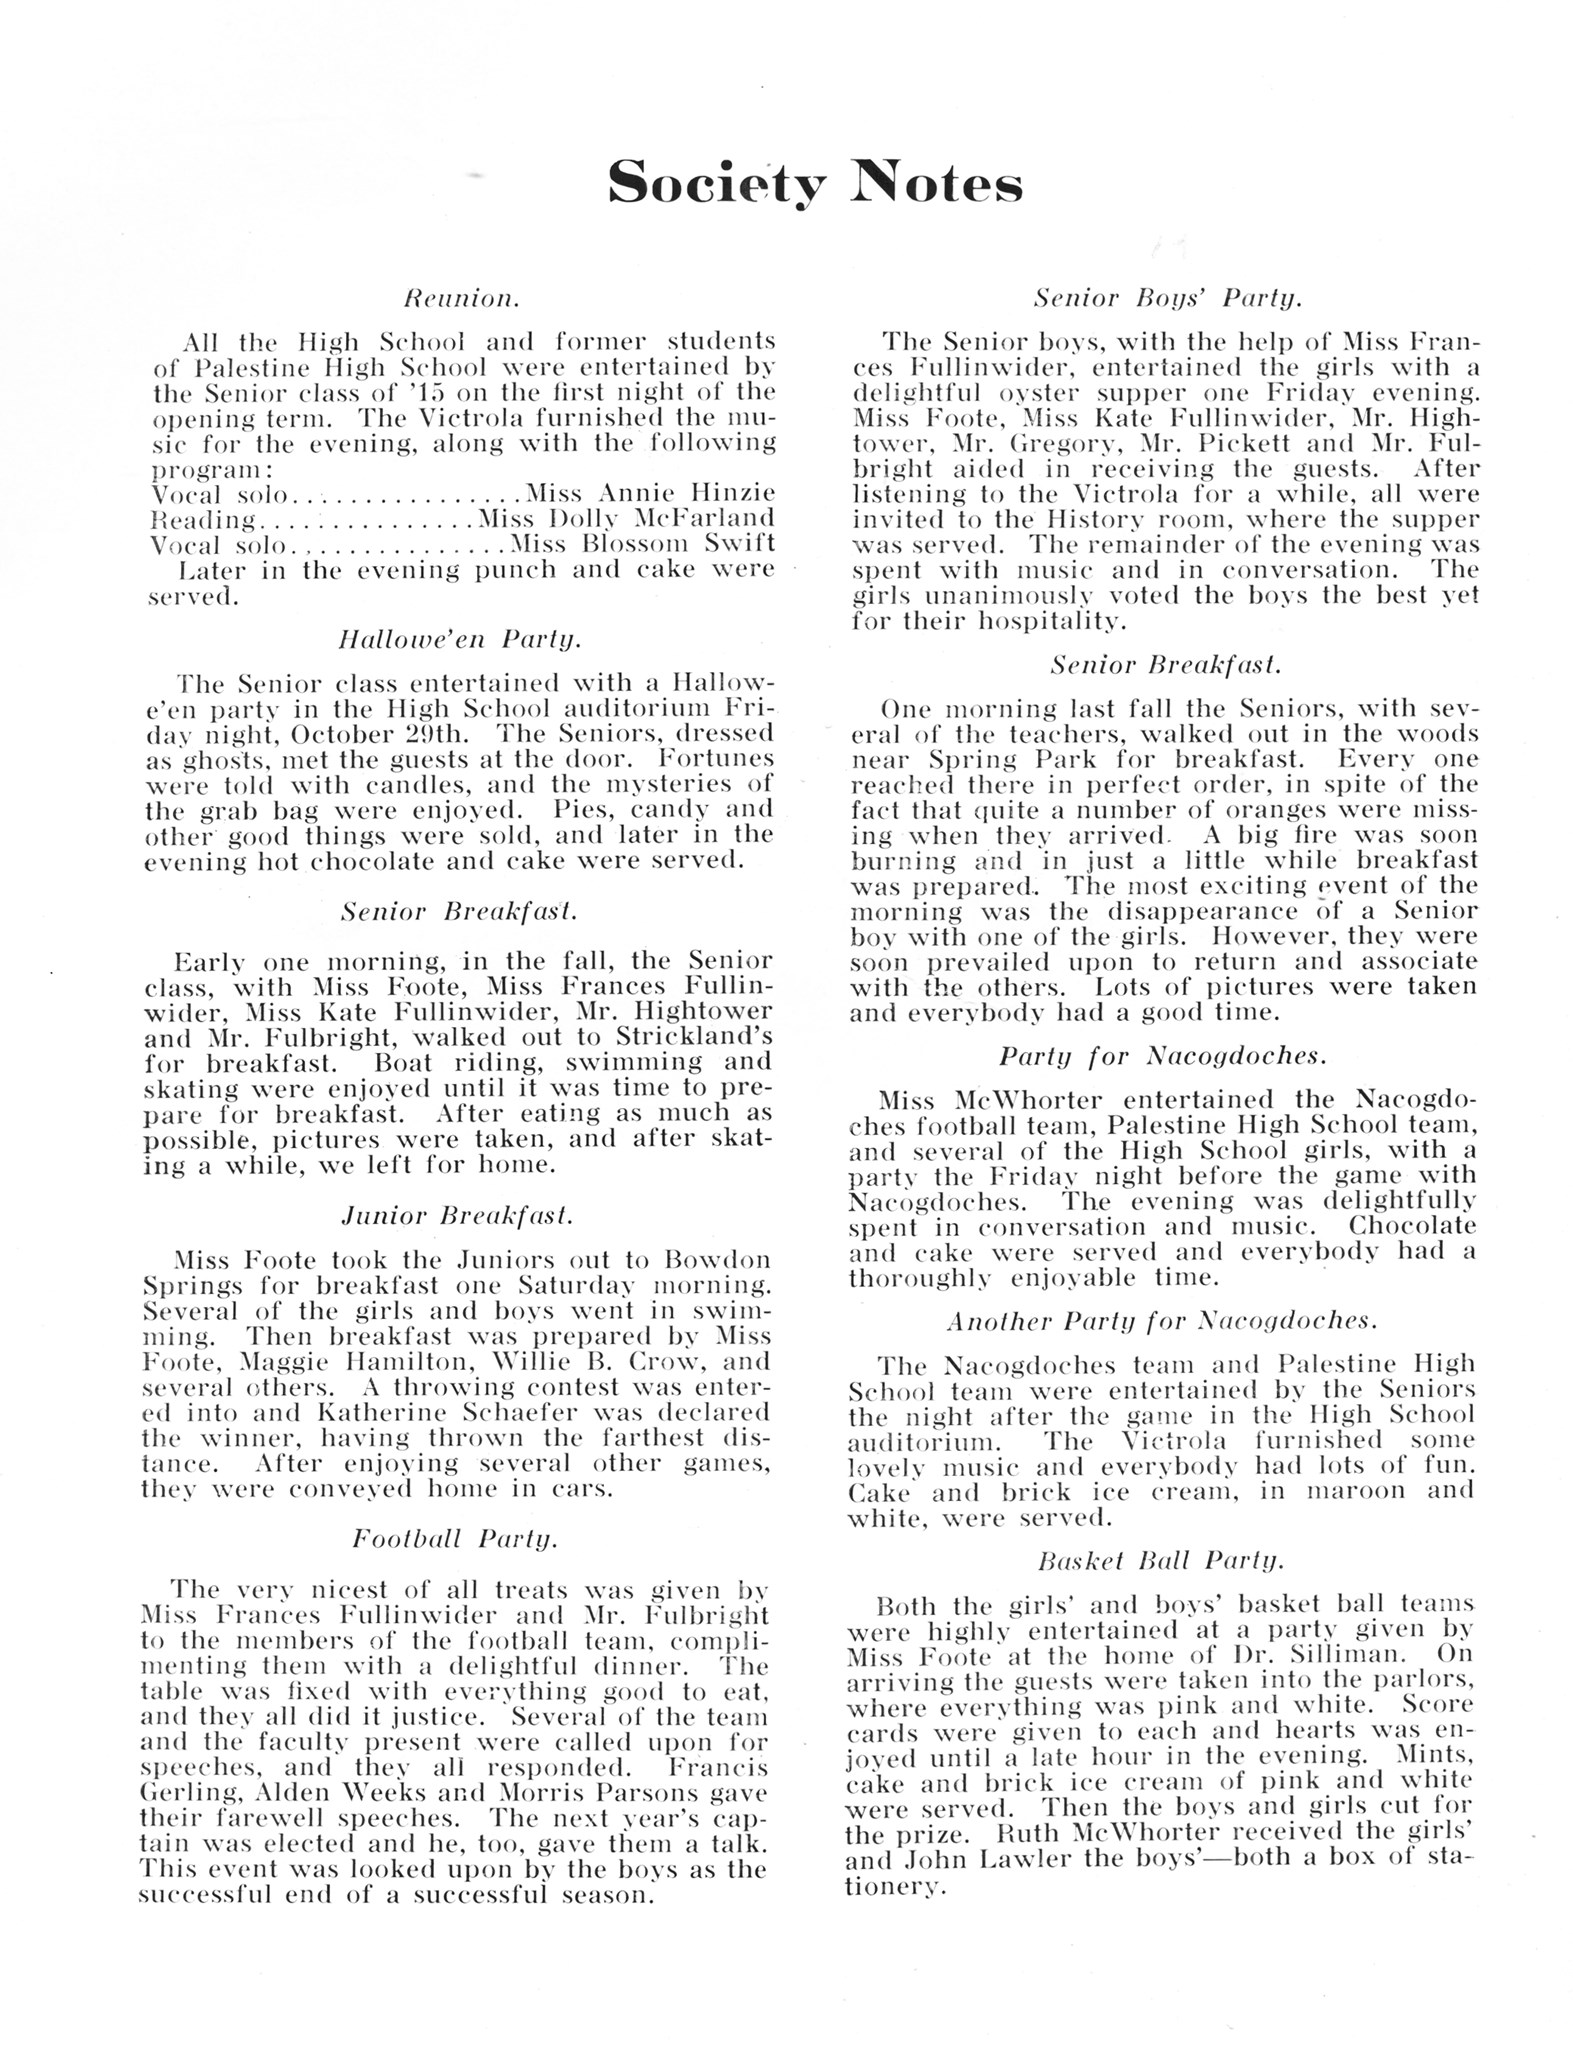 ../../../Images/Large/1915/Arclight-1915-pg0054.jpg